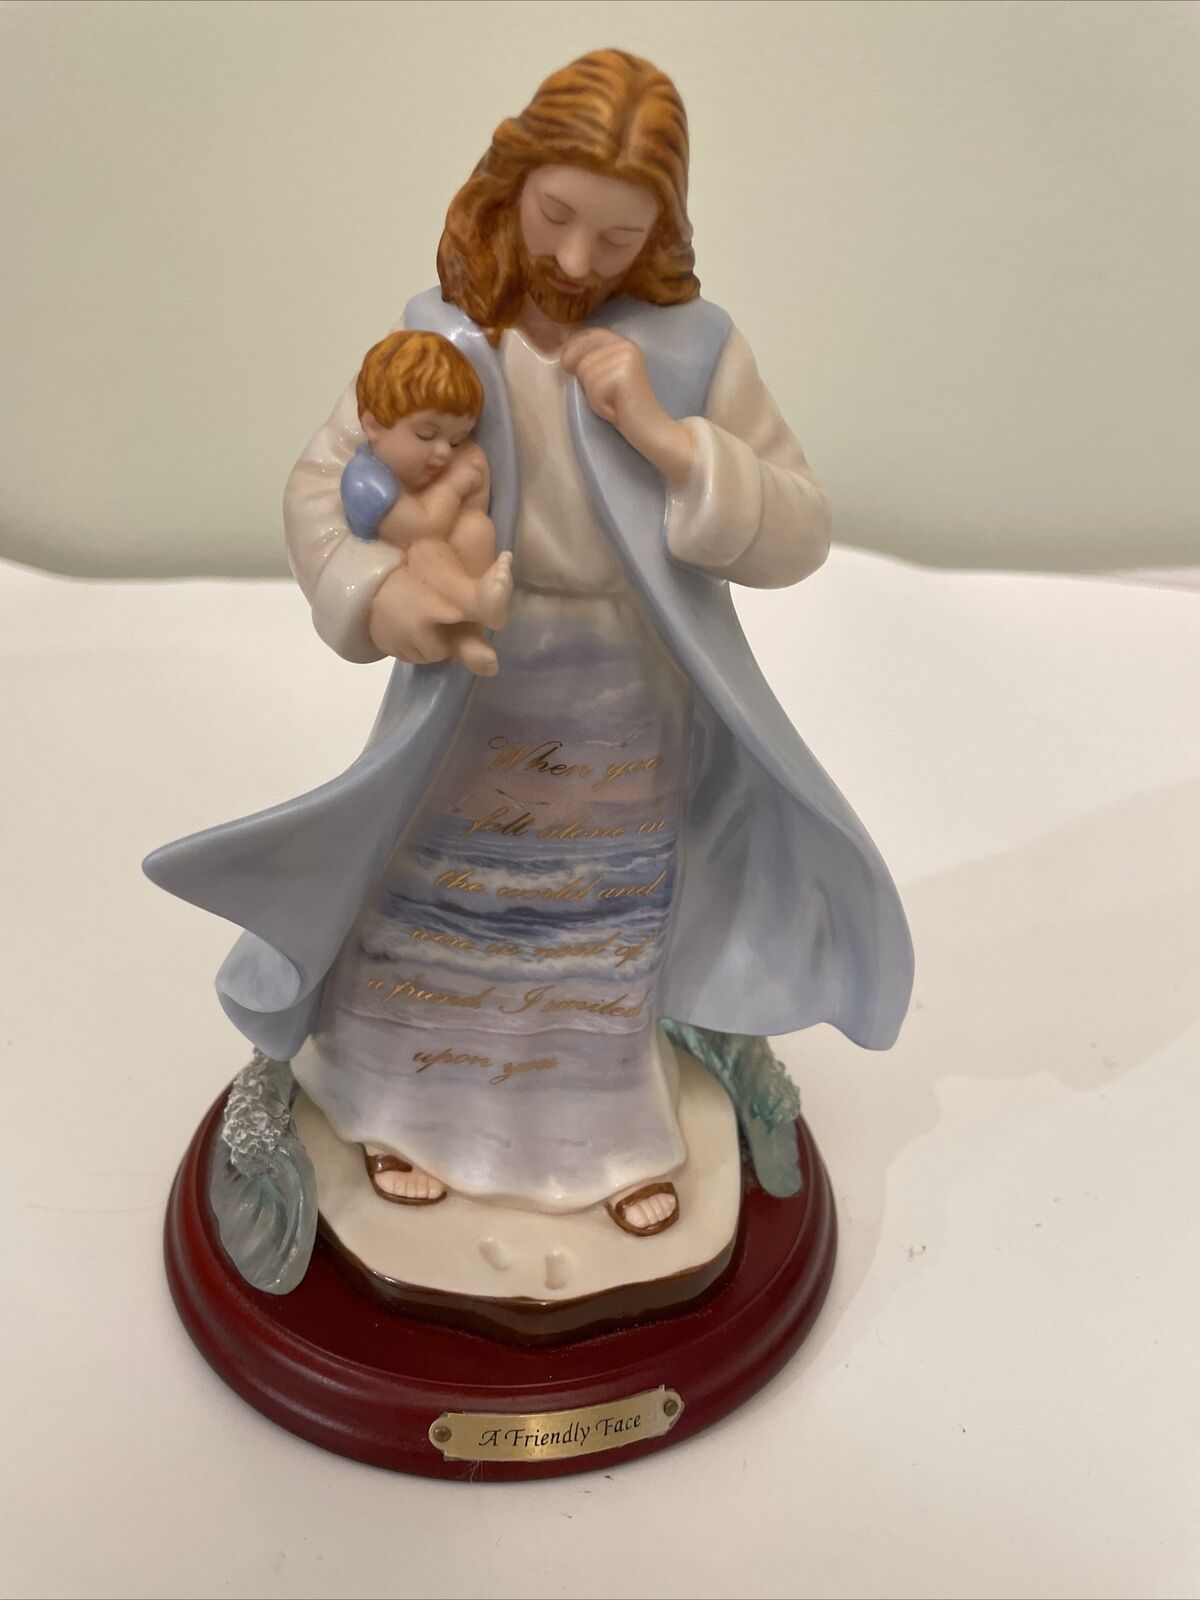 2007 BRADFORD EDITION A FRIENDLY FACE 2nd Edition IN HIS LOVING ARMS Figurine